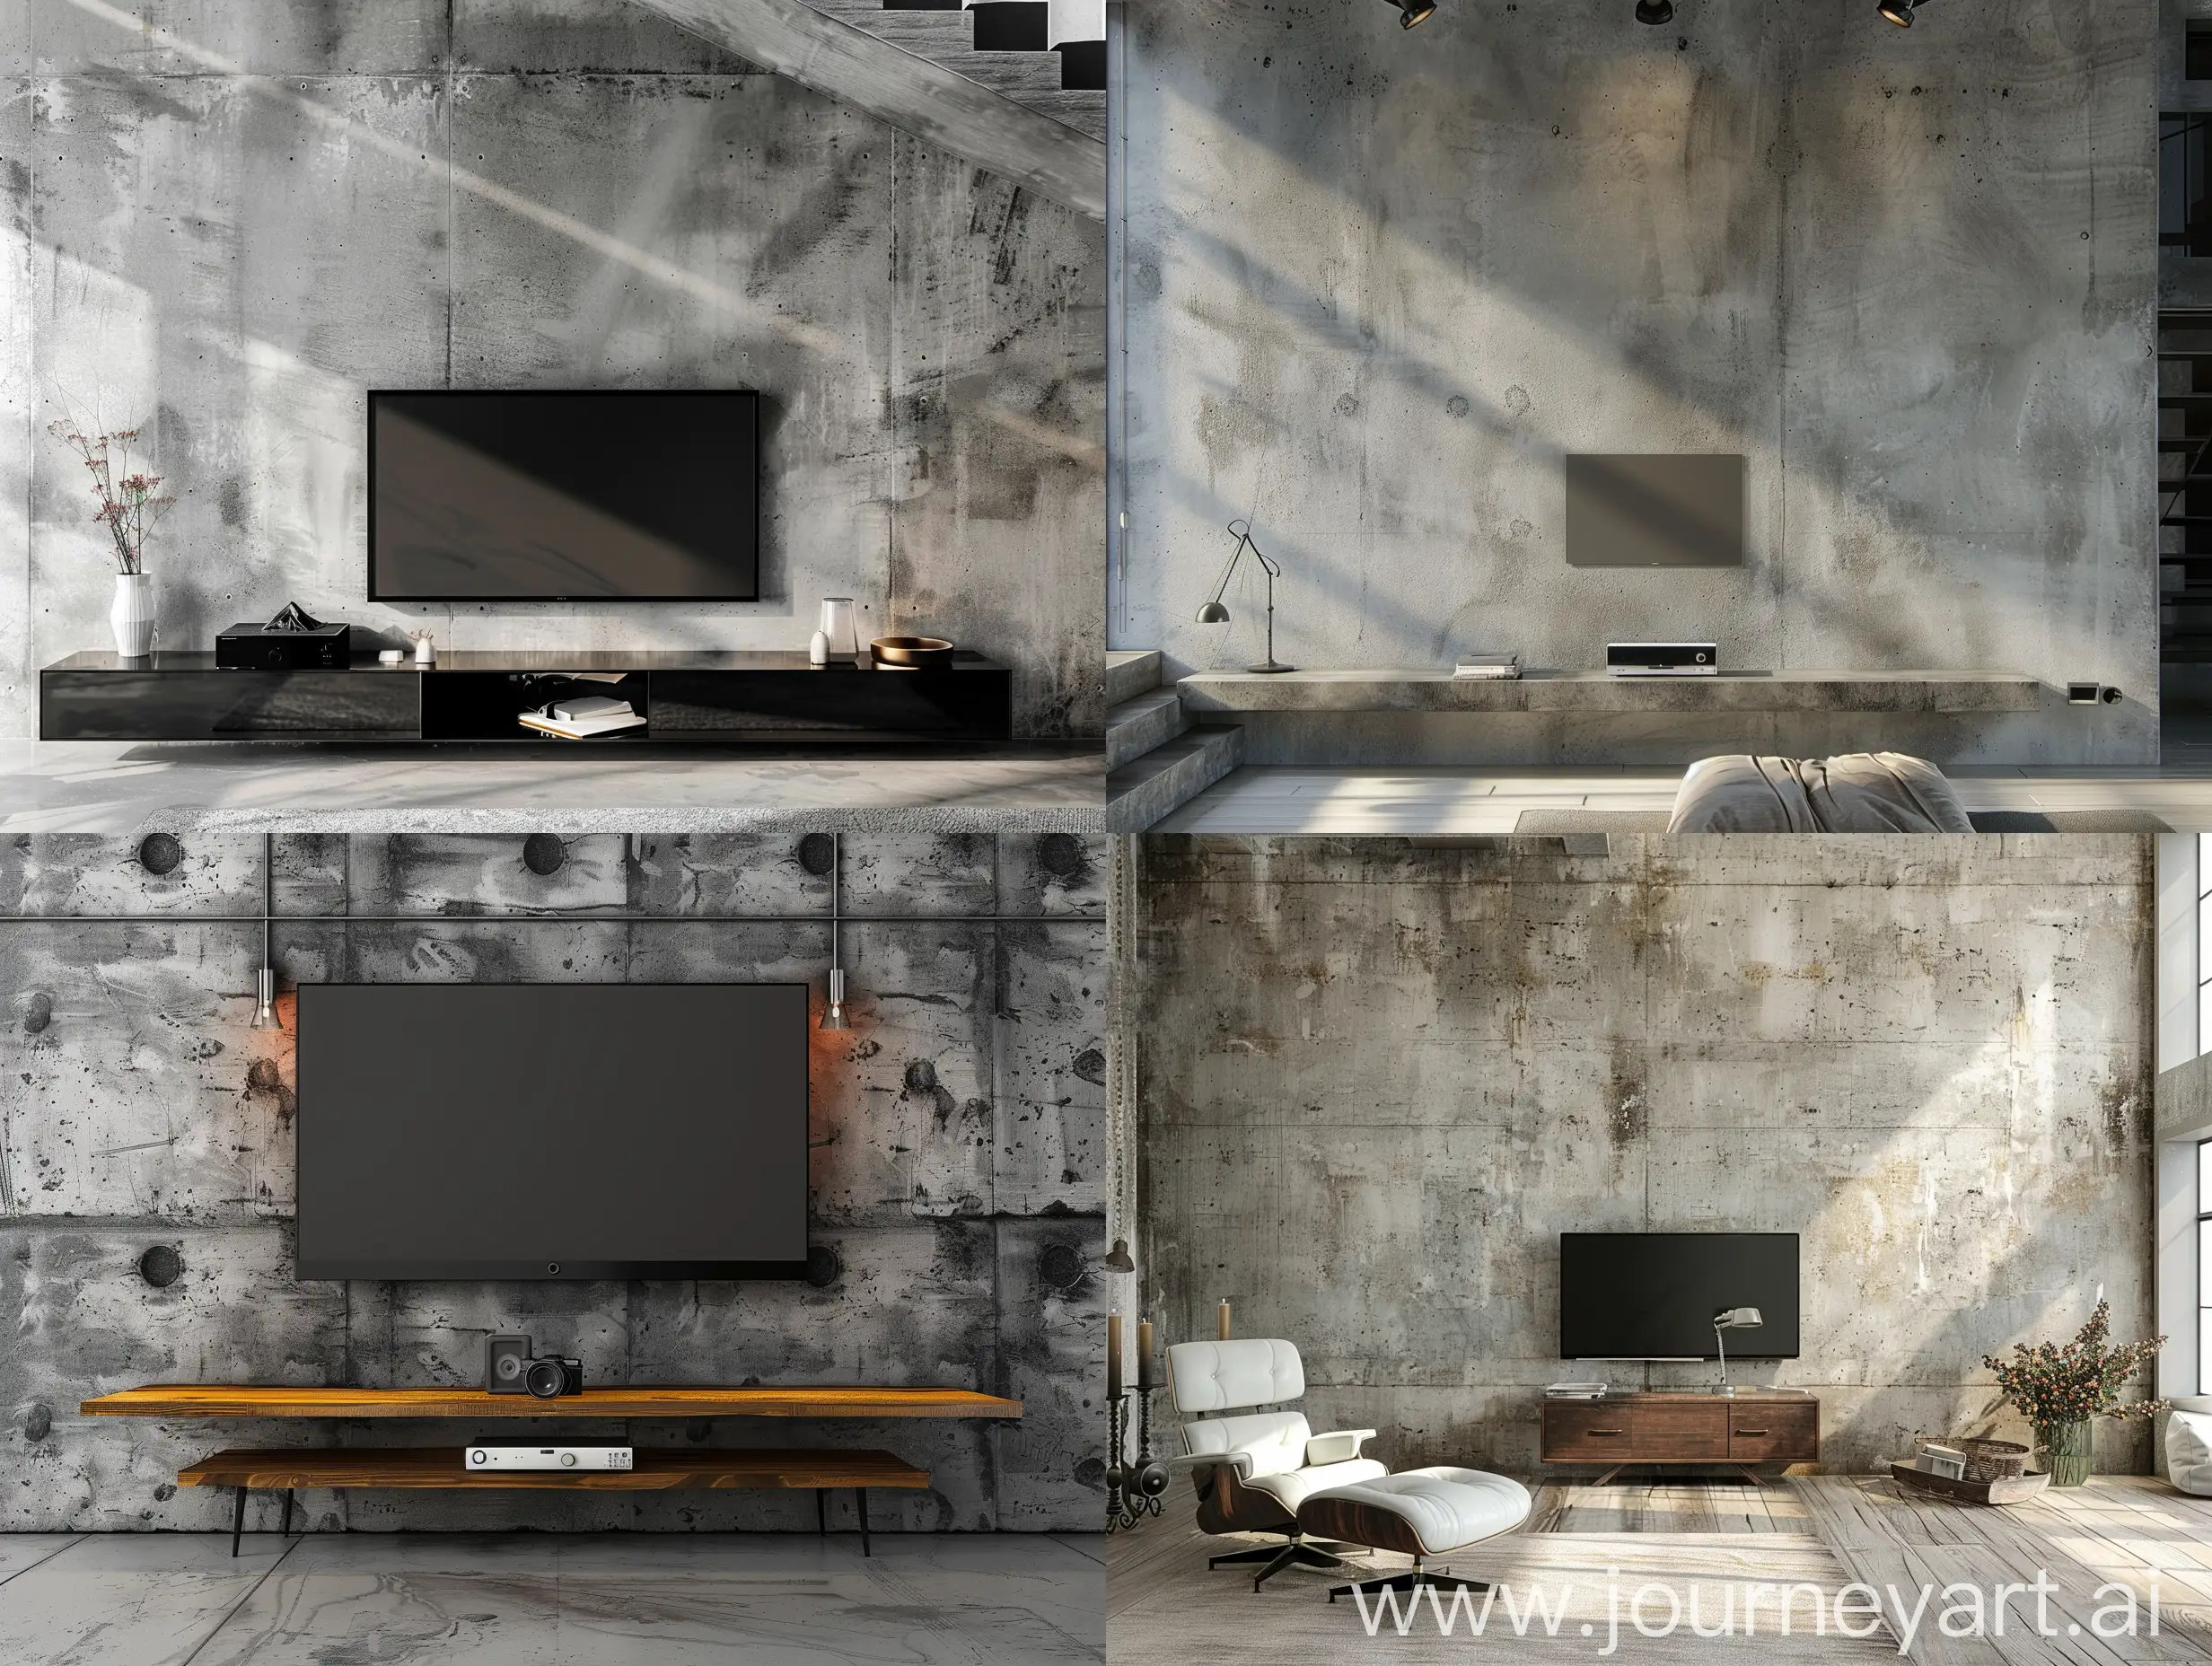 Modern-Loft-Style-TV-Room-Interior-Wall-Mockup-with-Concrete-Finish